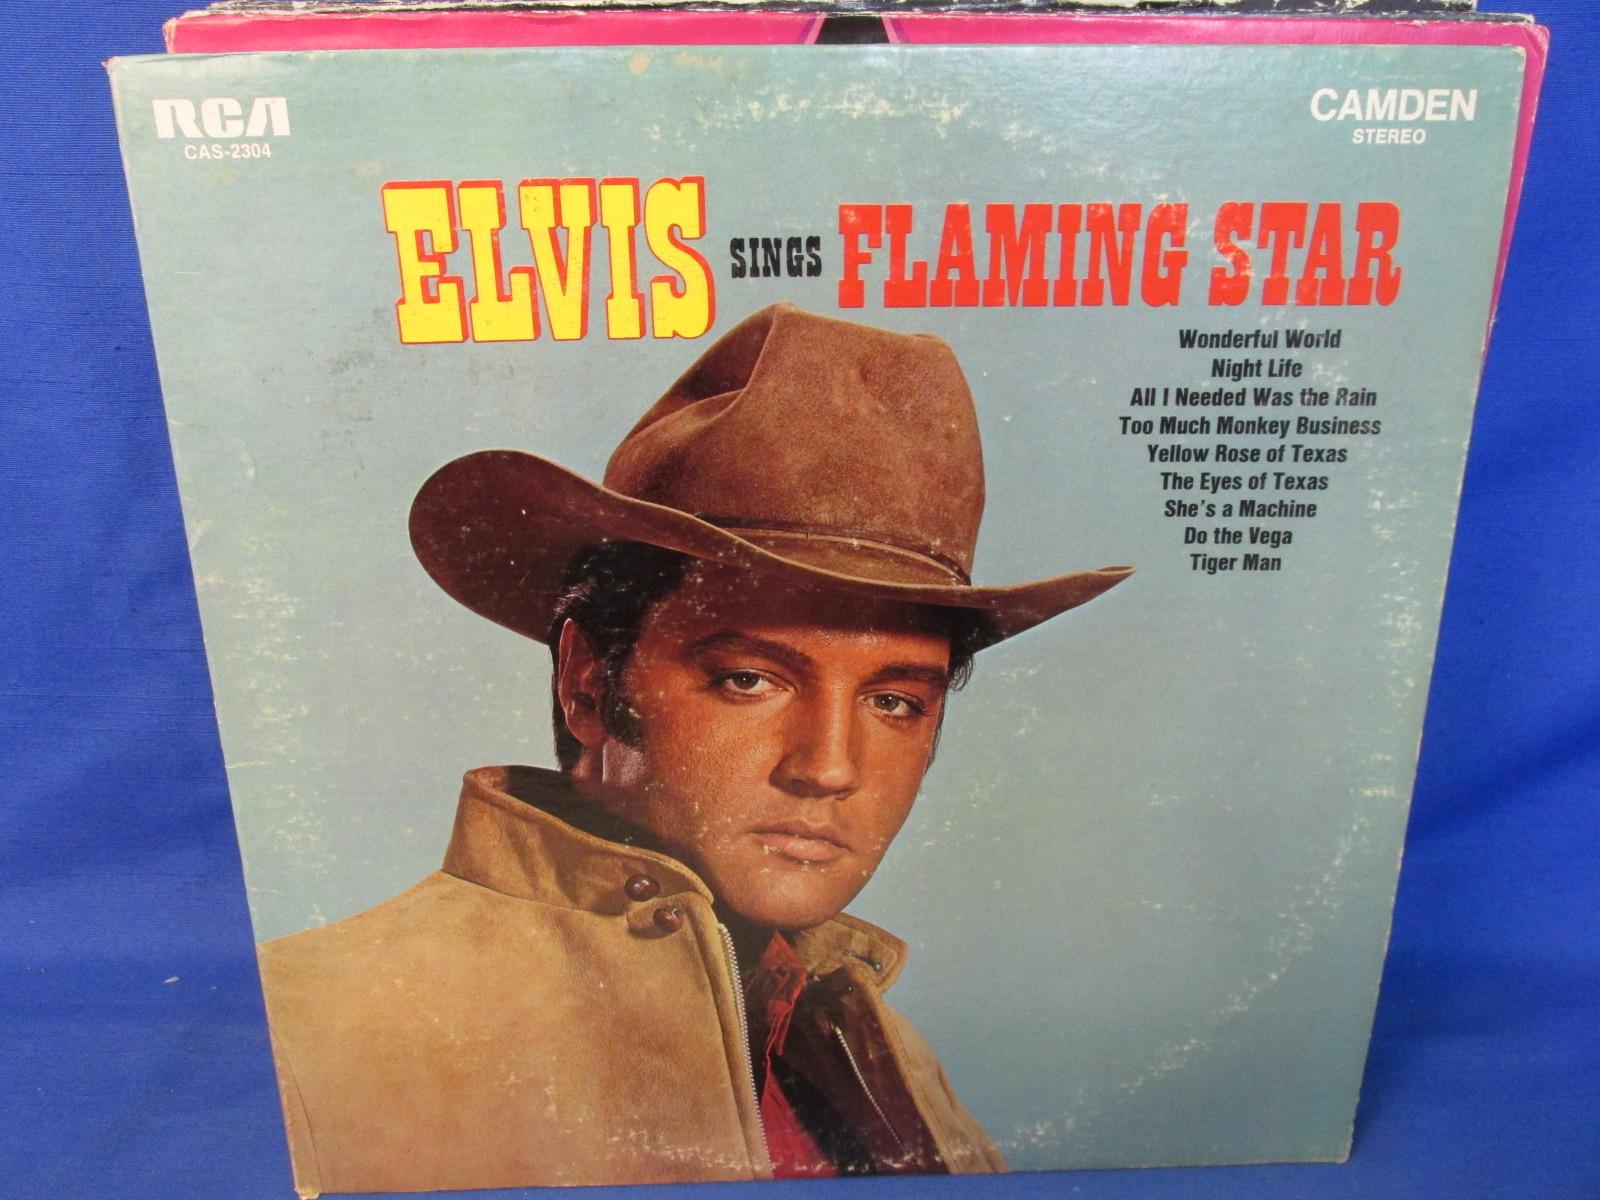 16 Elvis Presley Albums – Please see Photos For Titles – Covers